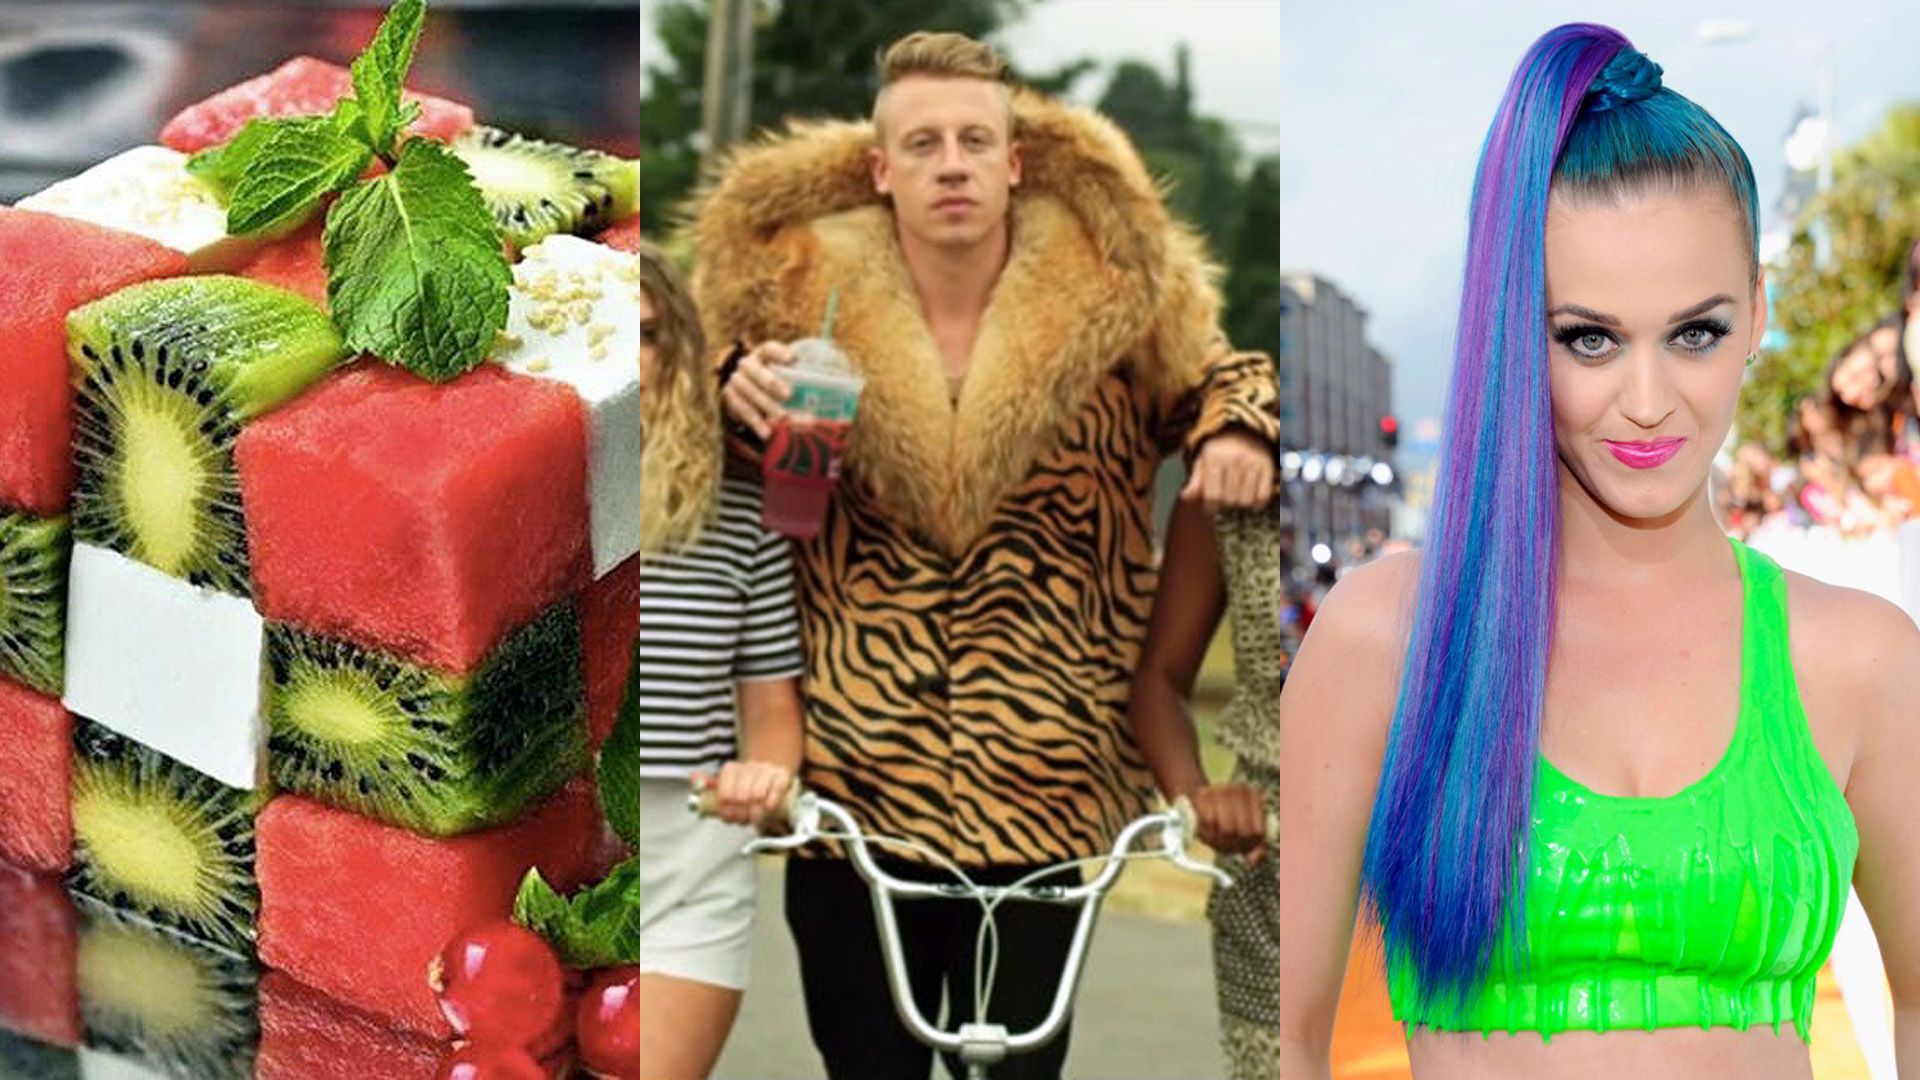 Summer Wk9: Cuisine, Couture or Coiffure!